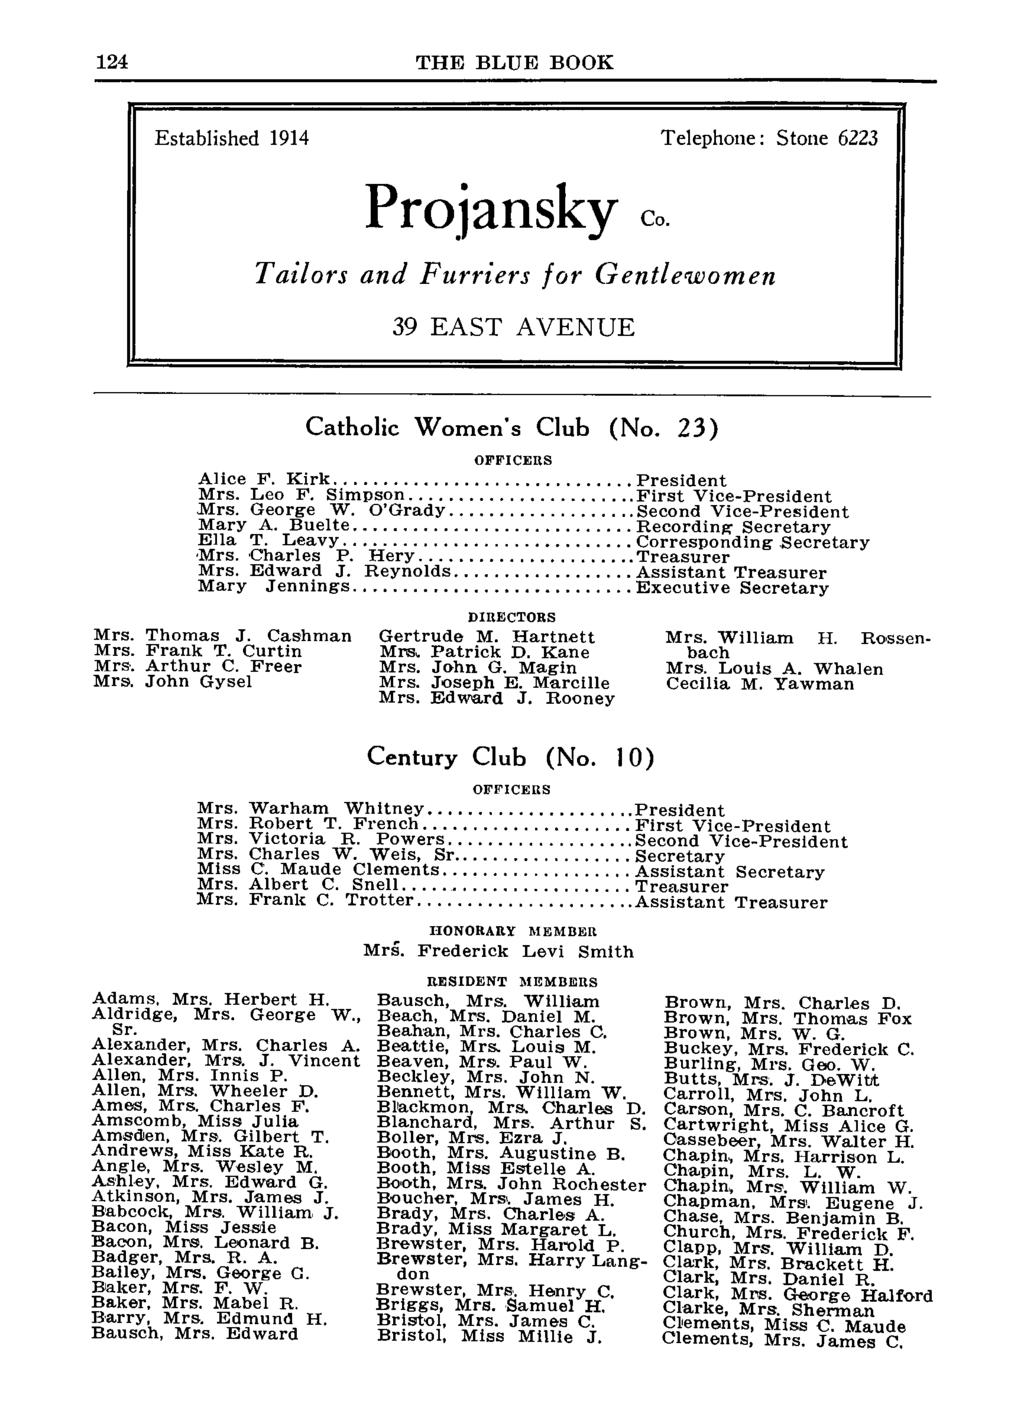 124 THE BLUE BOOK Established 1914 Telephone: Stone 6223 Projansky Co. Tailors and Furriers for Gentlewomen 39 EAST AVENUE Catholic Women's Club (No. 23) OFFICERS Alice F. Kirk President Mrs. Leo F.